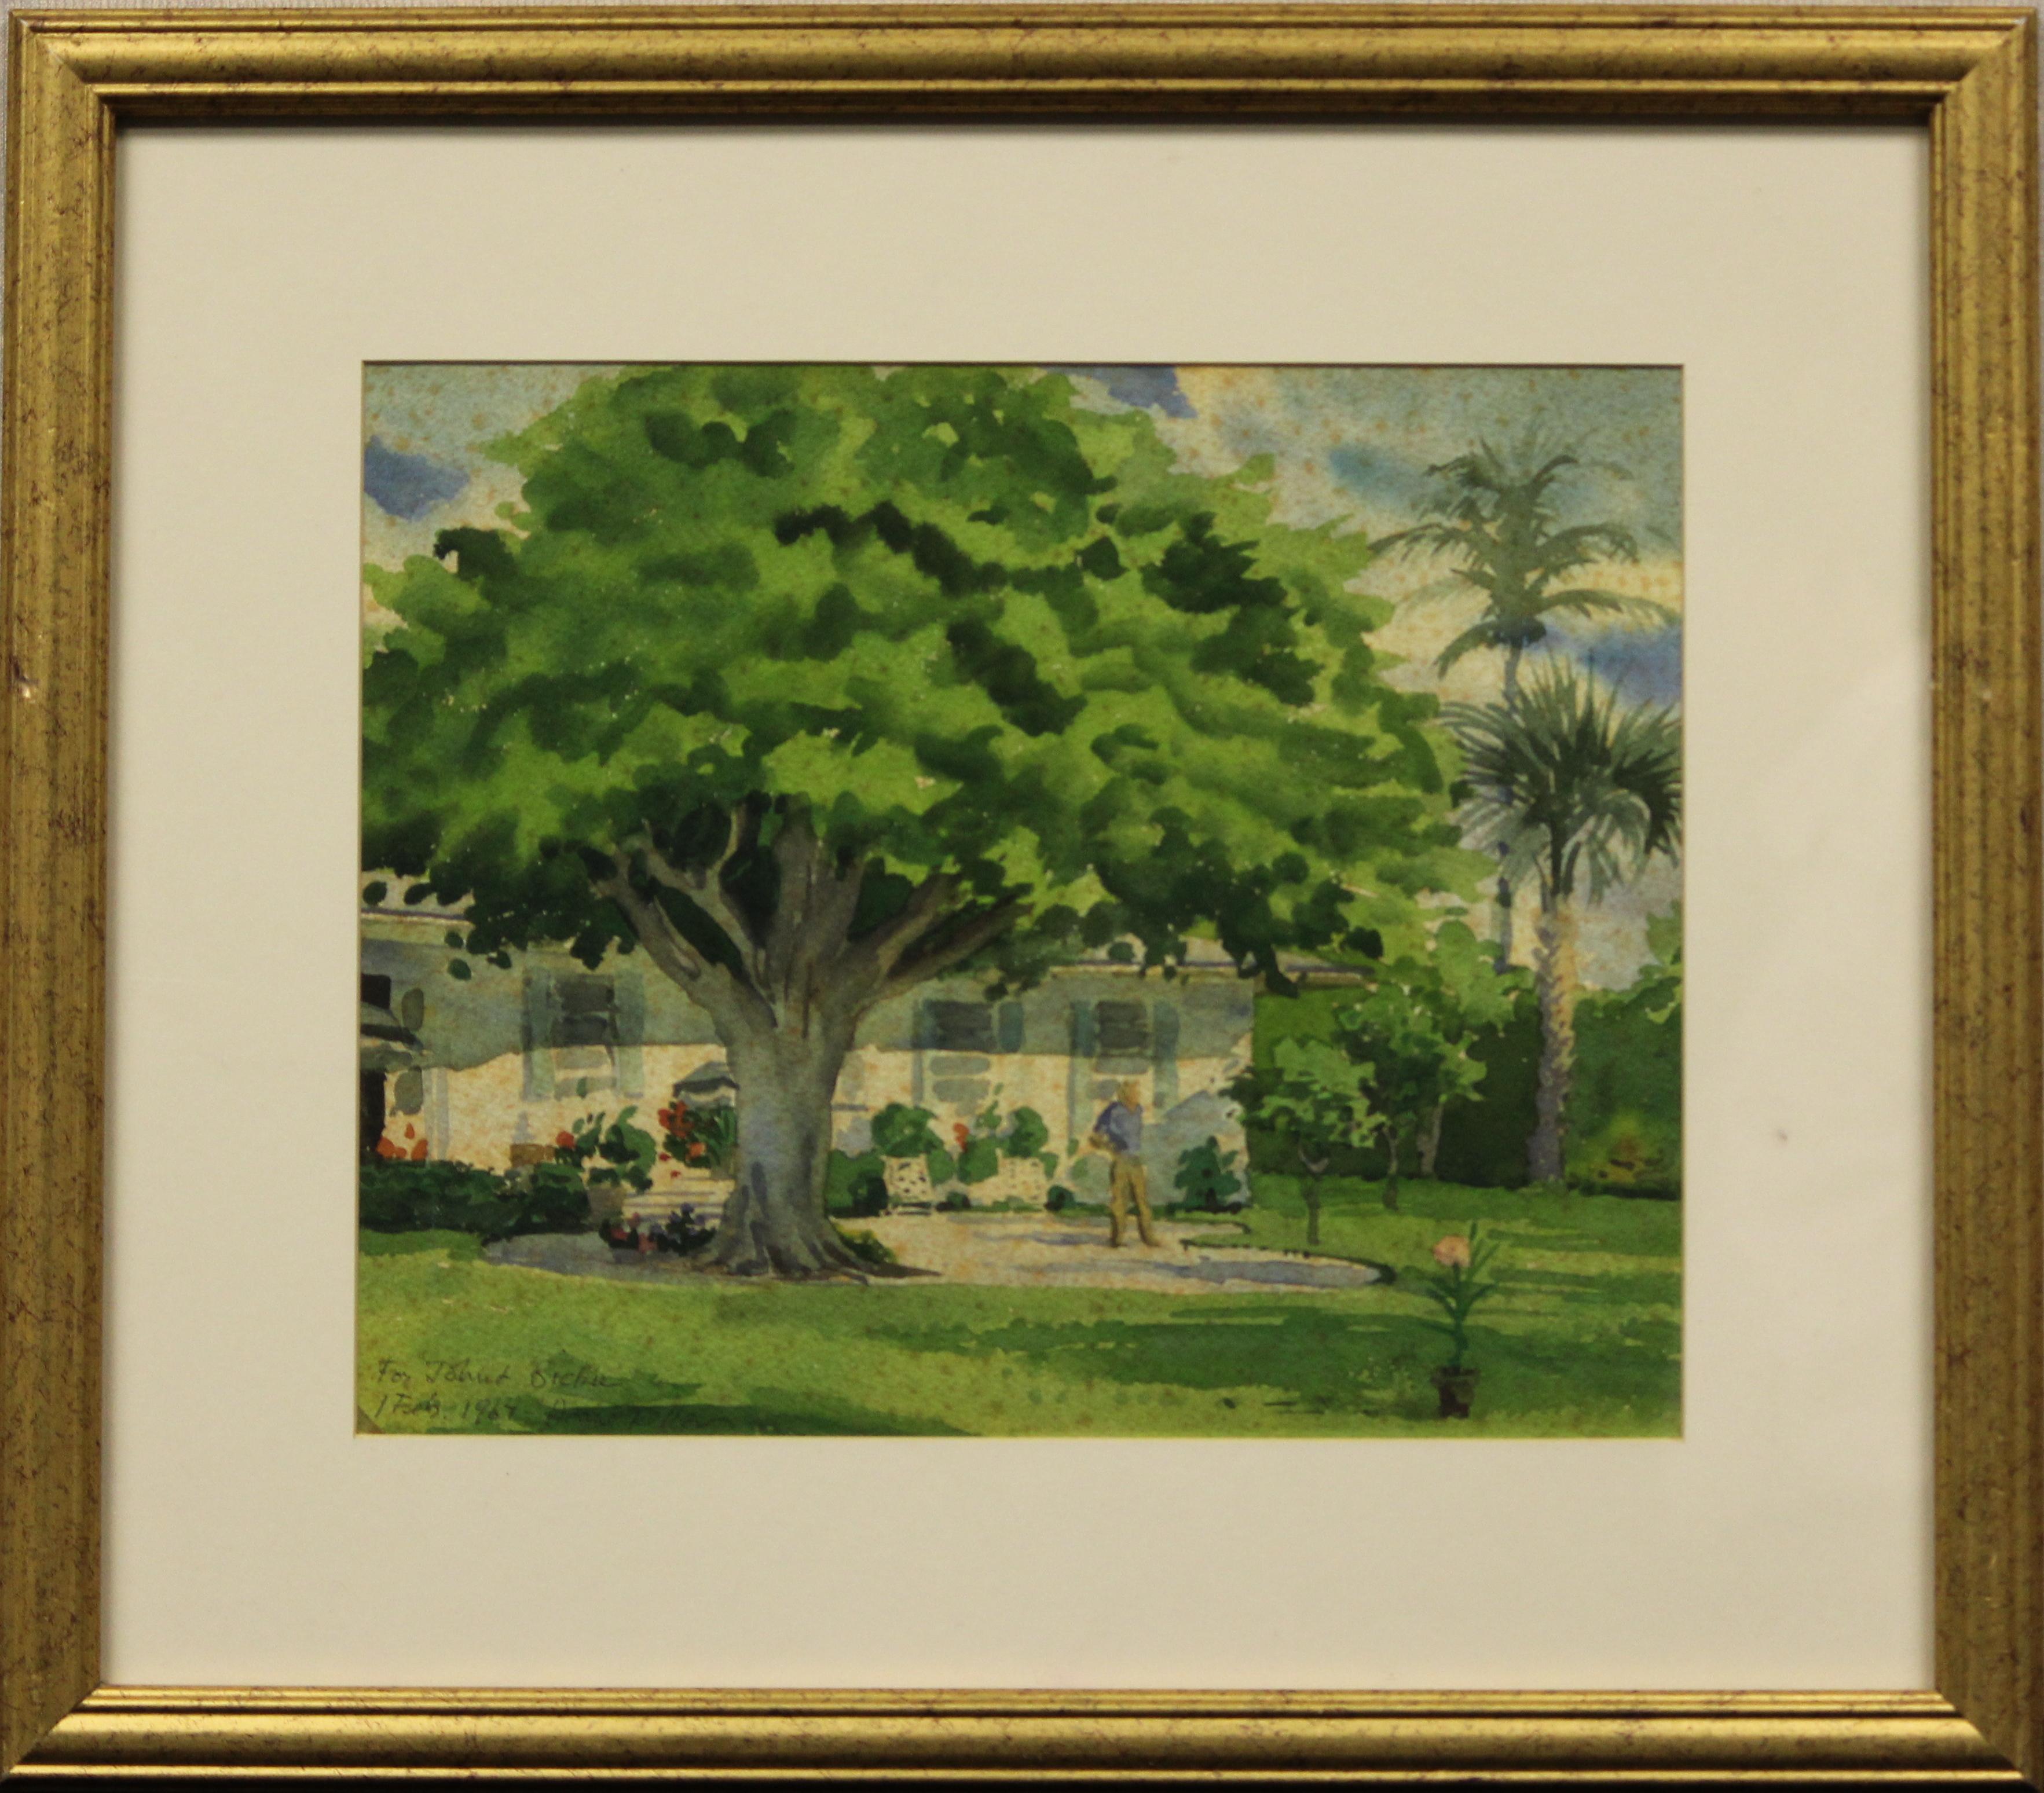 Watercolor depicting the tropical residence of John L. Bickie with banyan & palm trees signed by Deane Keller (1901-1992) & dated 1967 whose works are represented at Yale University

Art Sz: 11 3/4"H x 14 3/4"W
Frame Sz: 19.3/4"H x 22 1/2"W

Deane